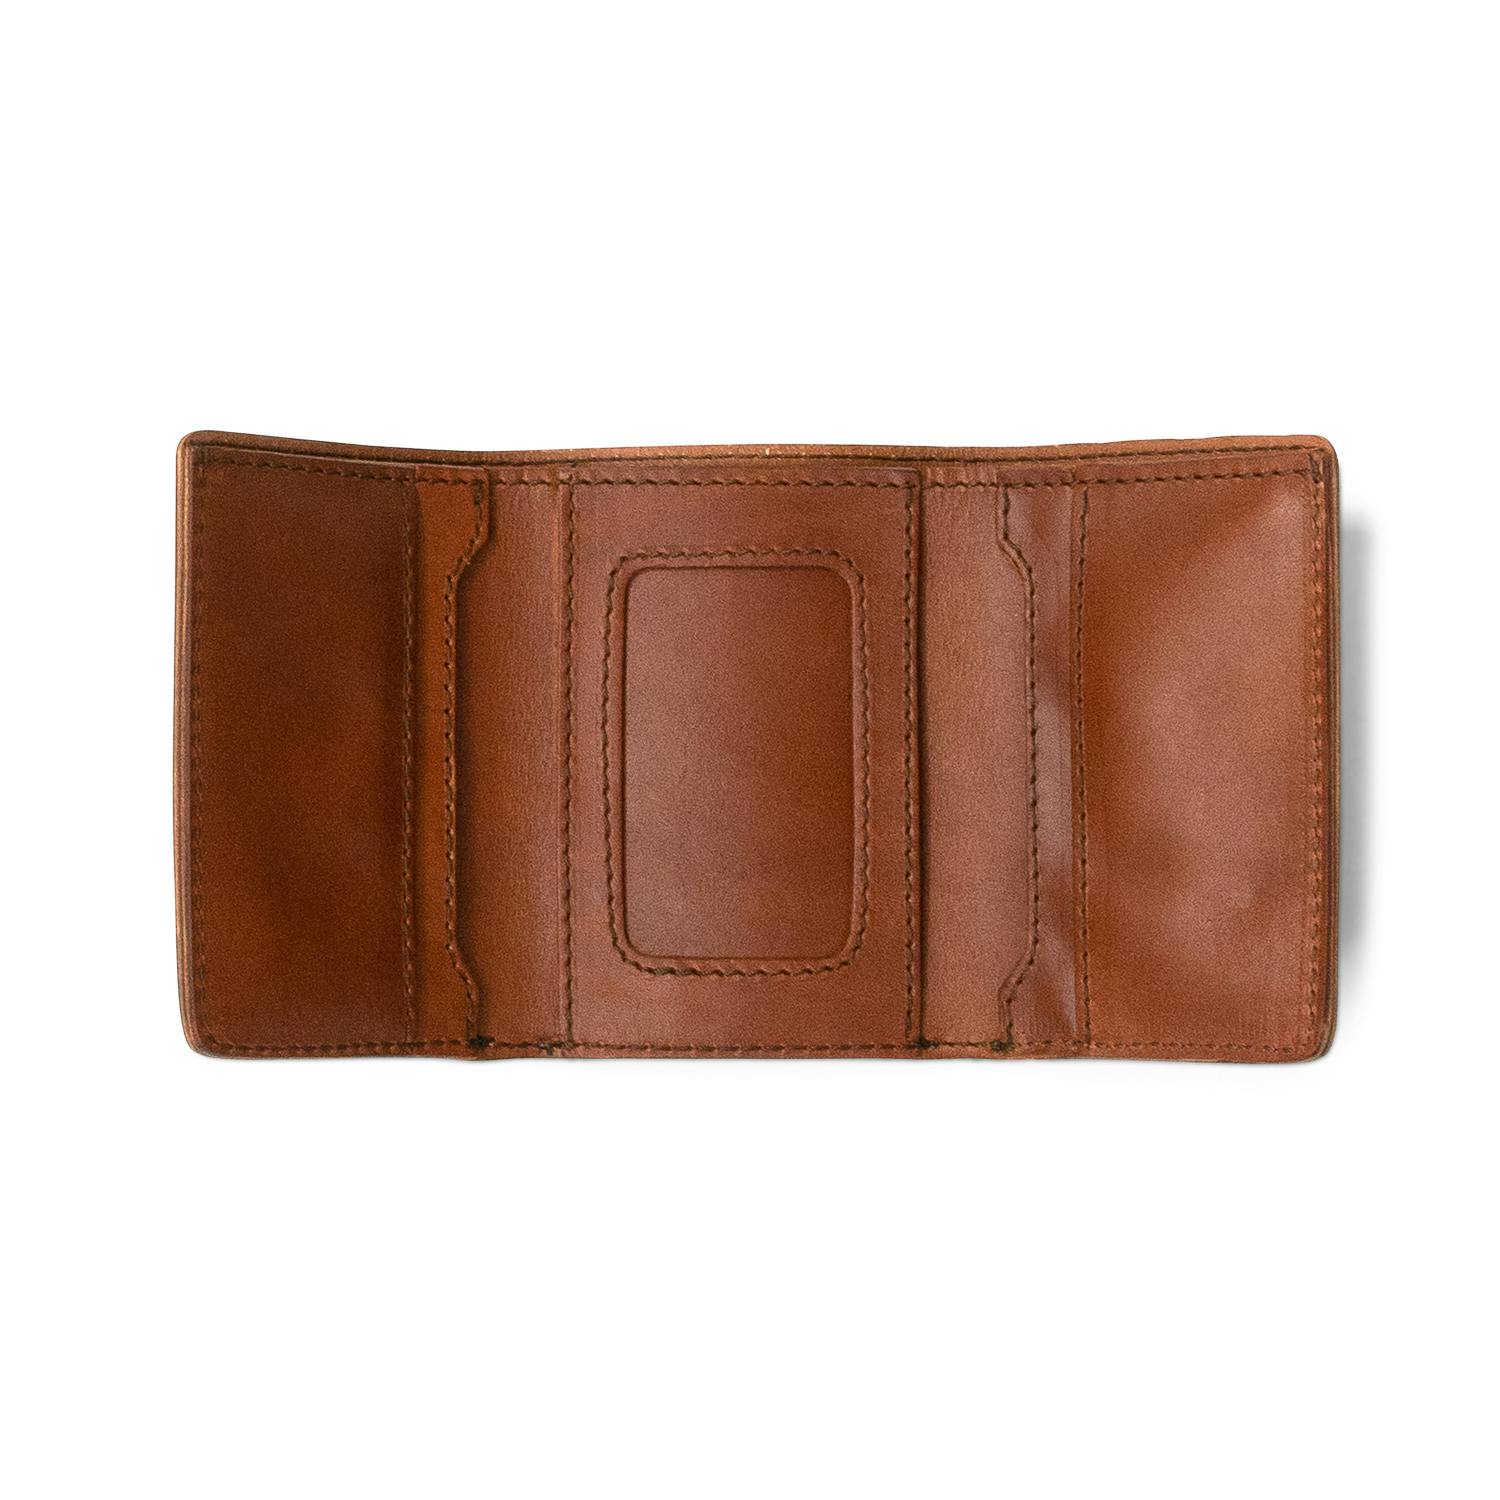 EAGLES WINGS Utah Utes Leather Trifold Wallet with Concho